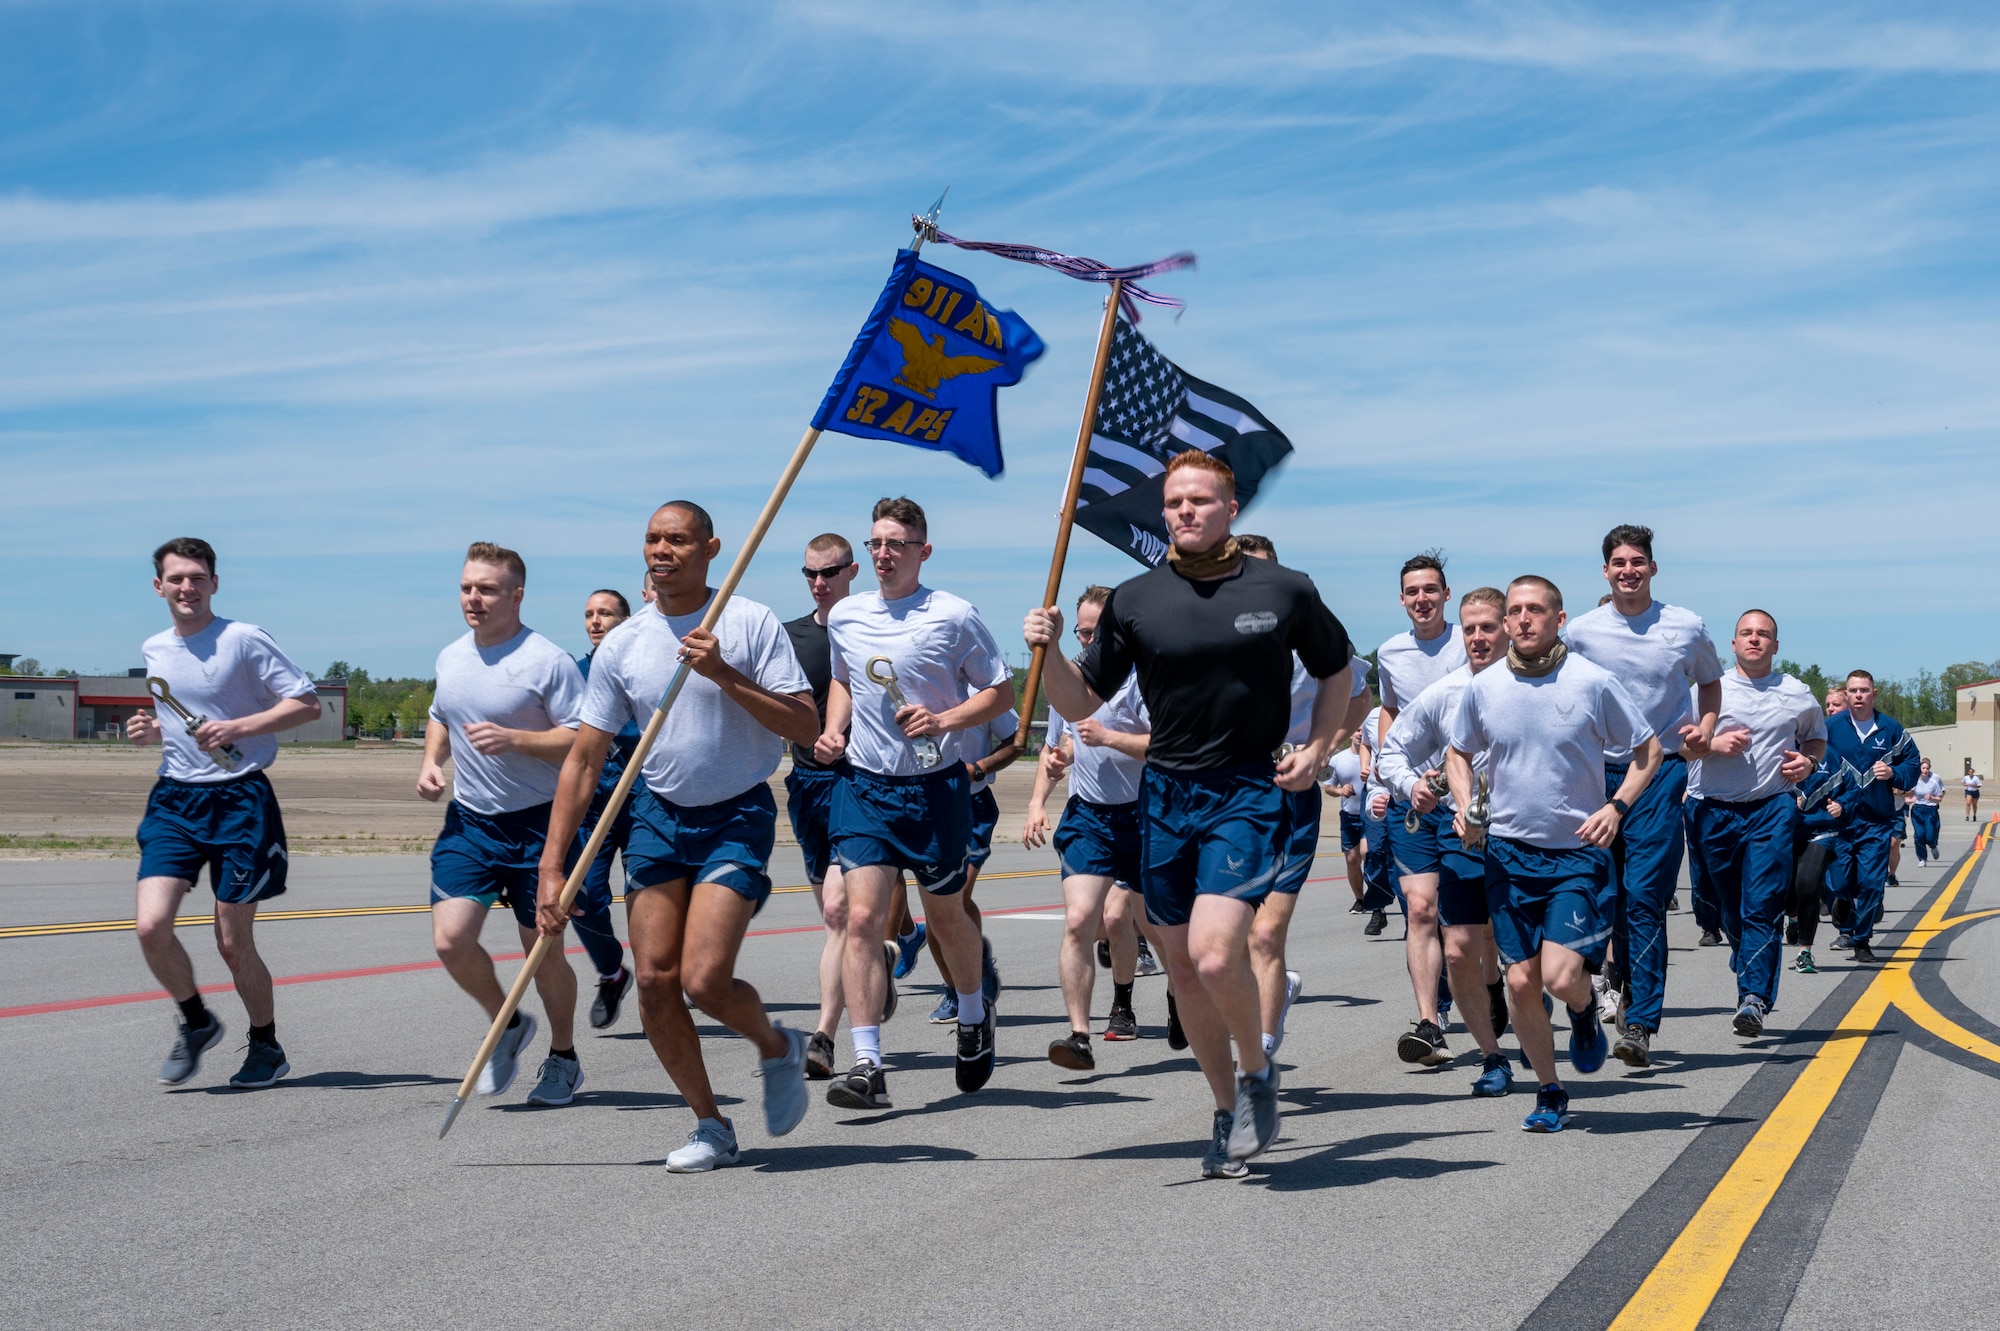 Airmen assigned to the 32nd Aerial Port Squadron run the annual Port Dawg Memorial Run on the flight line at the Pittsburgh International Airport Air Reserve Station, Pennsylvania, May 1, 2021. The PDMR is the way aerial port Airmen from around the Air Force pay respect to their fallen Airmen from the previous year.